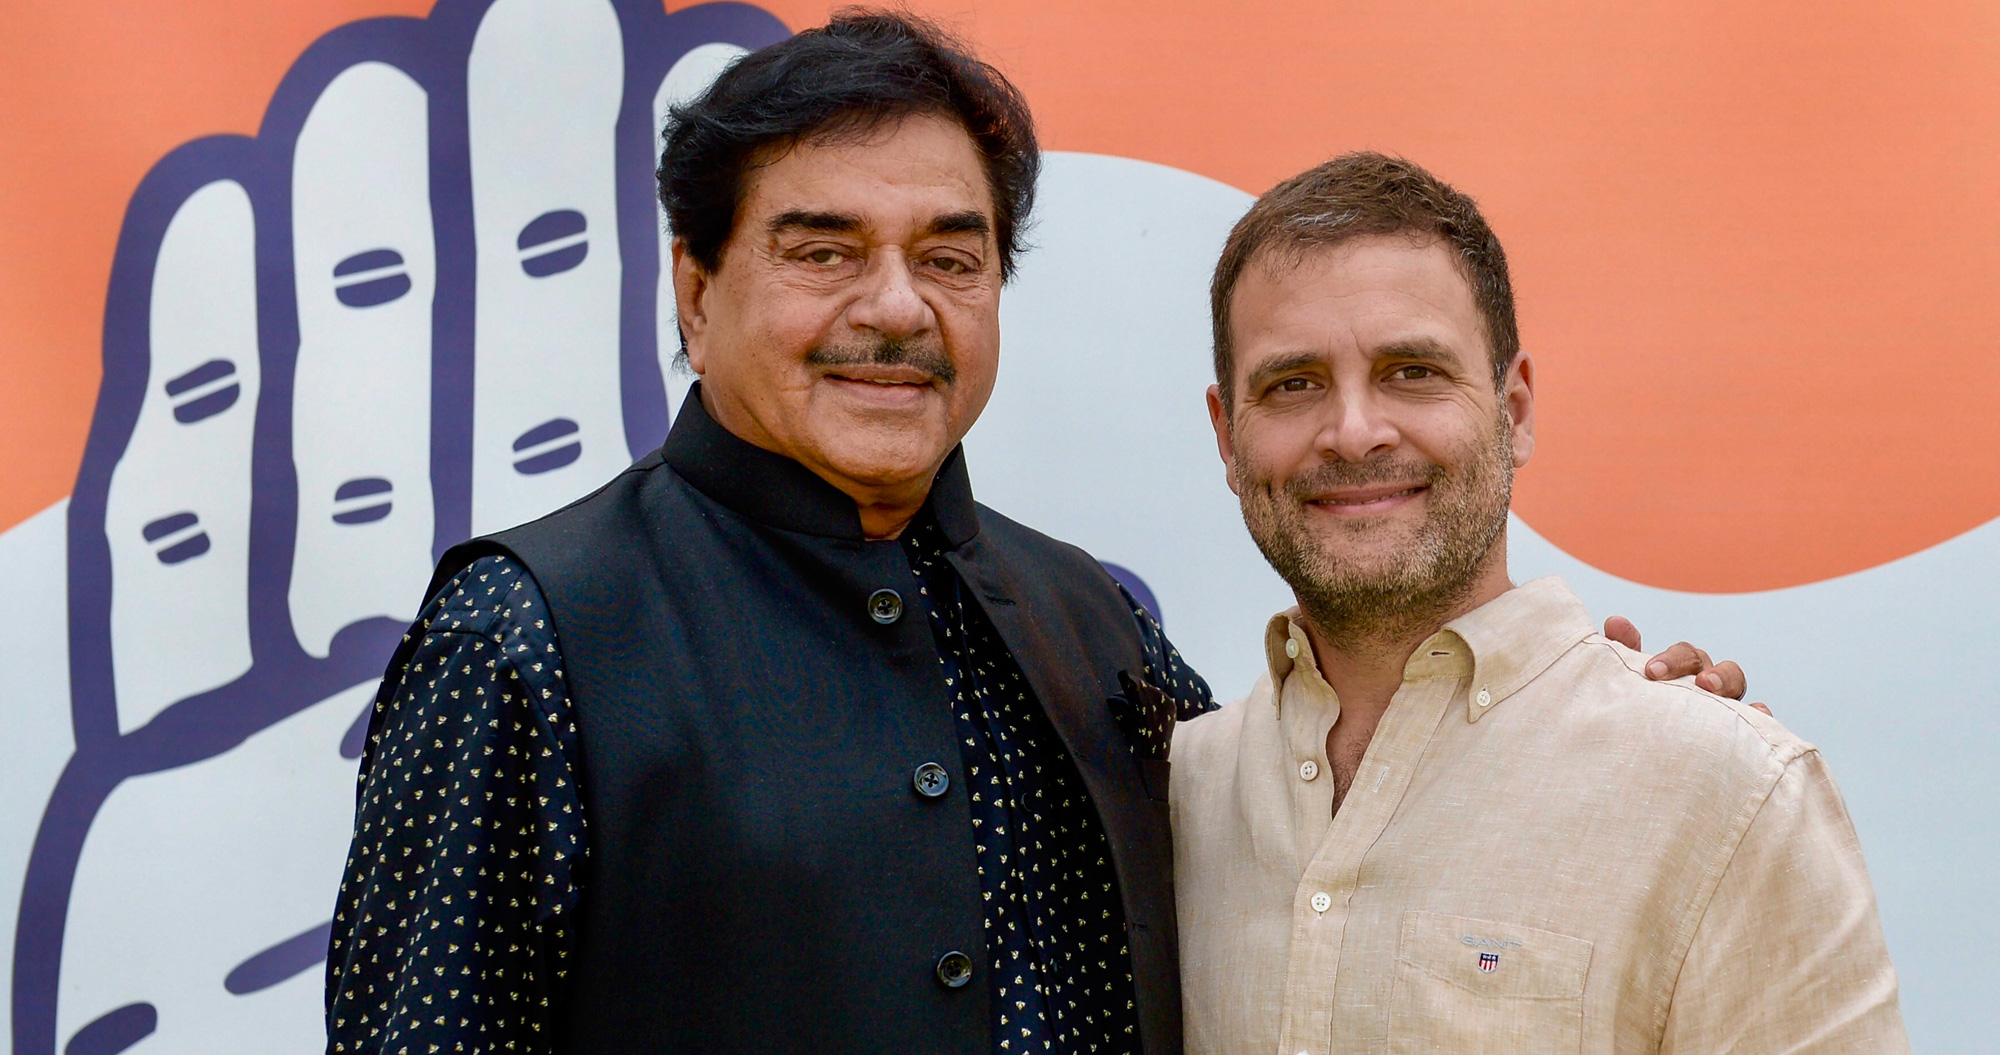 Joining Congress as it is national party in true sense: Shatrughan Sinha